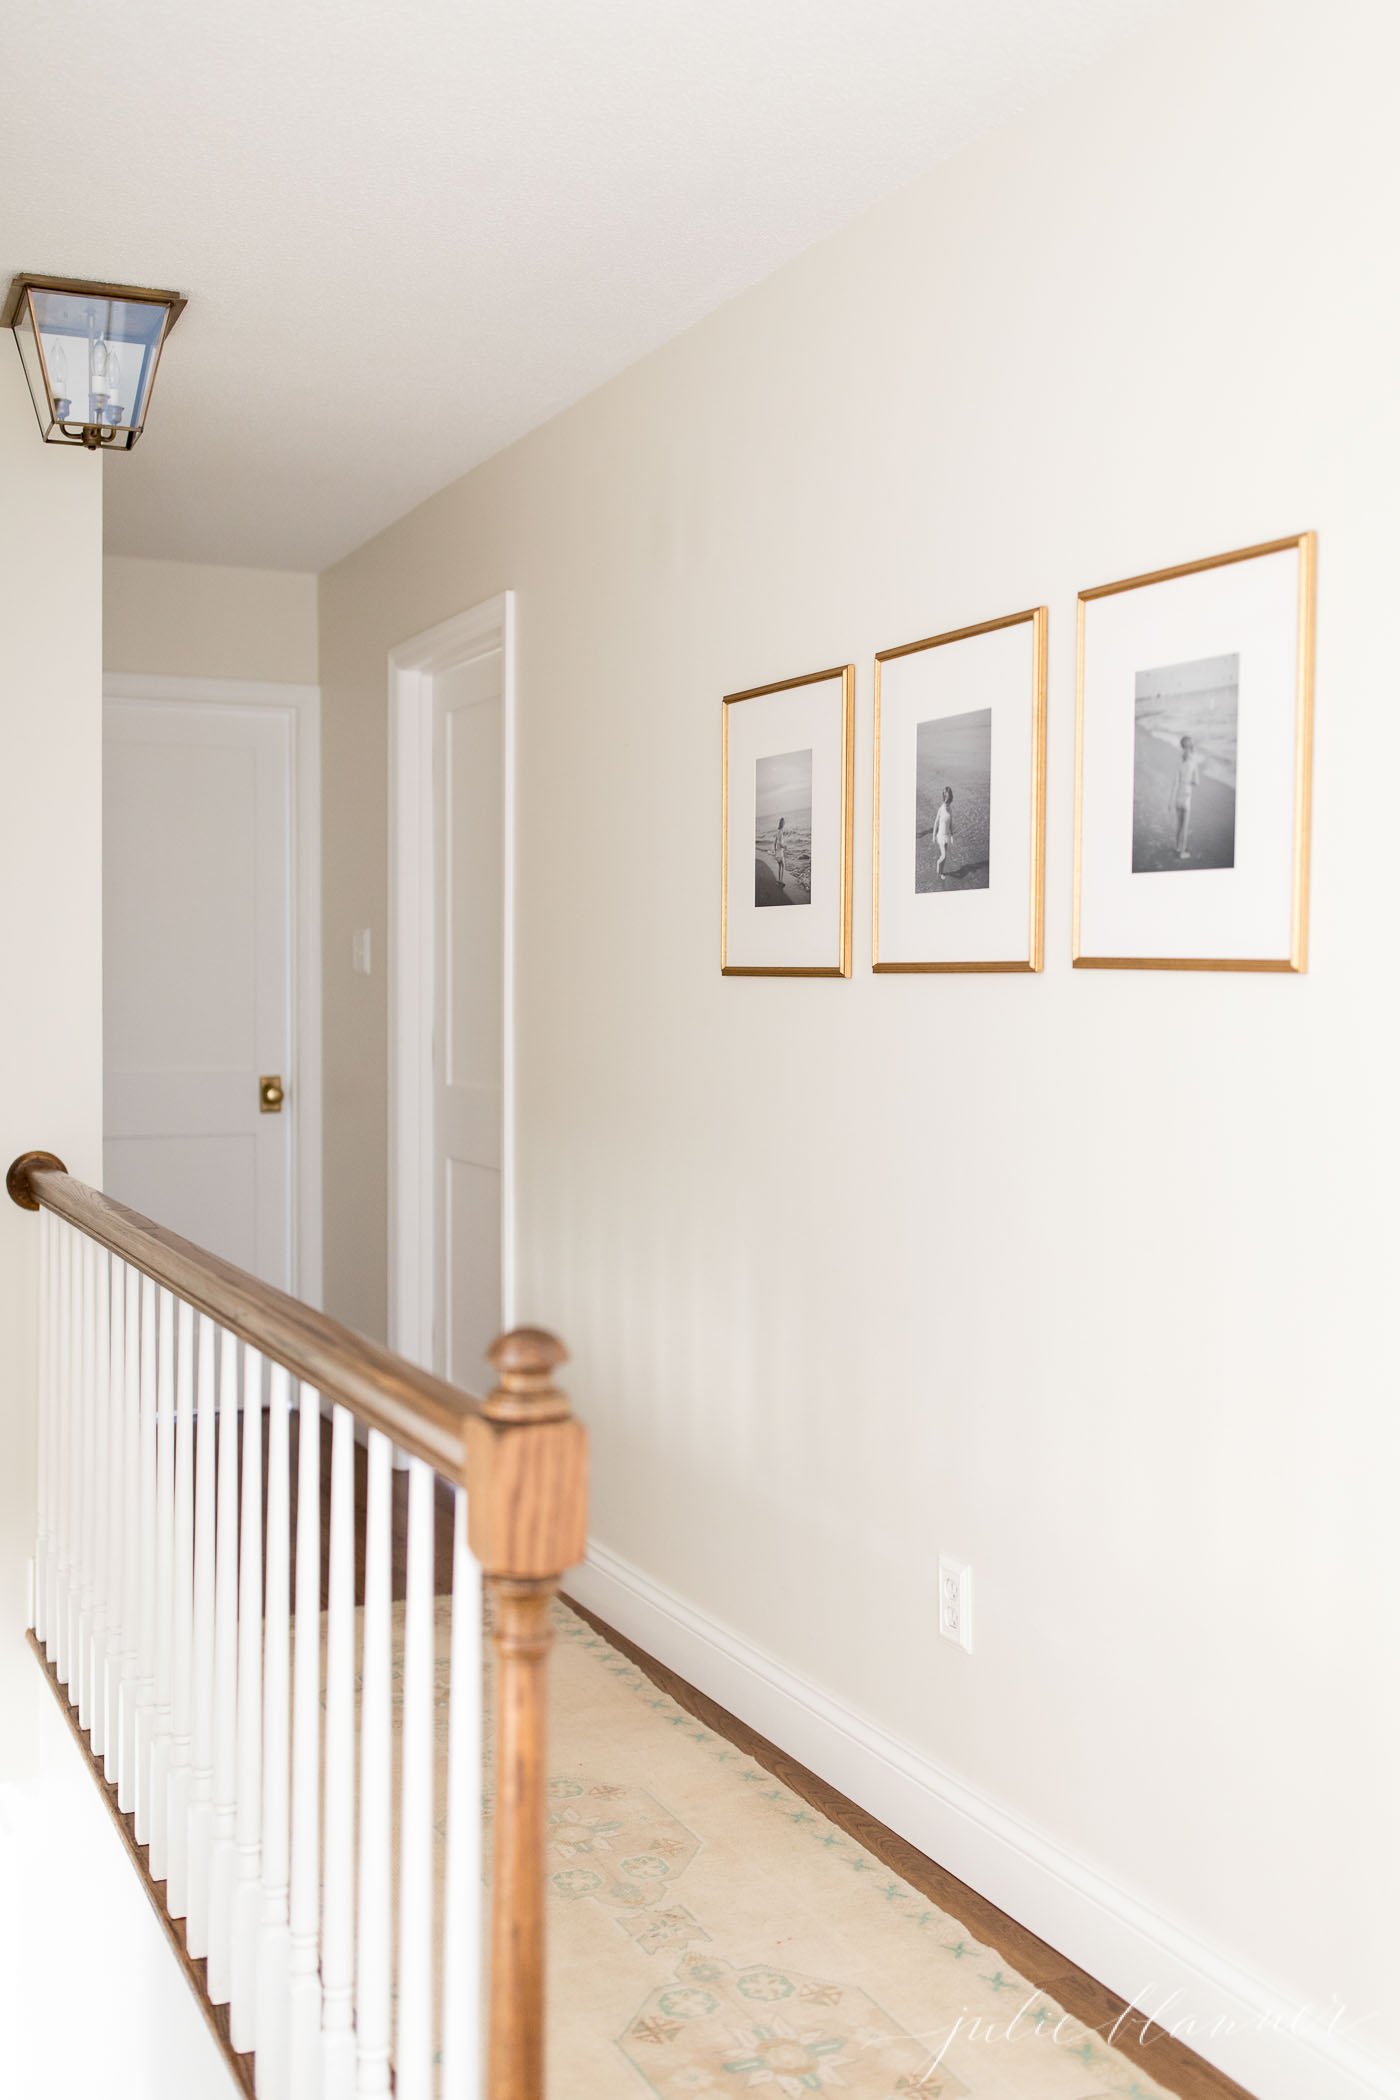 white trim paint in a white hallway of bedroom and bathroom doors.